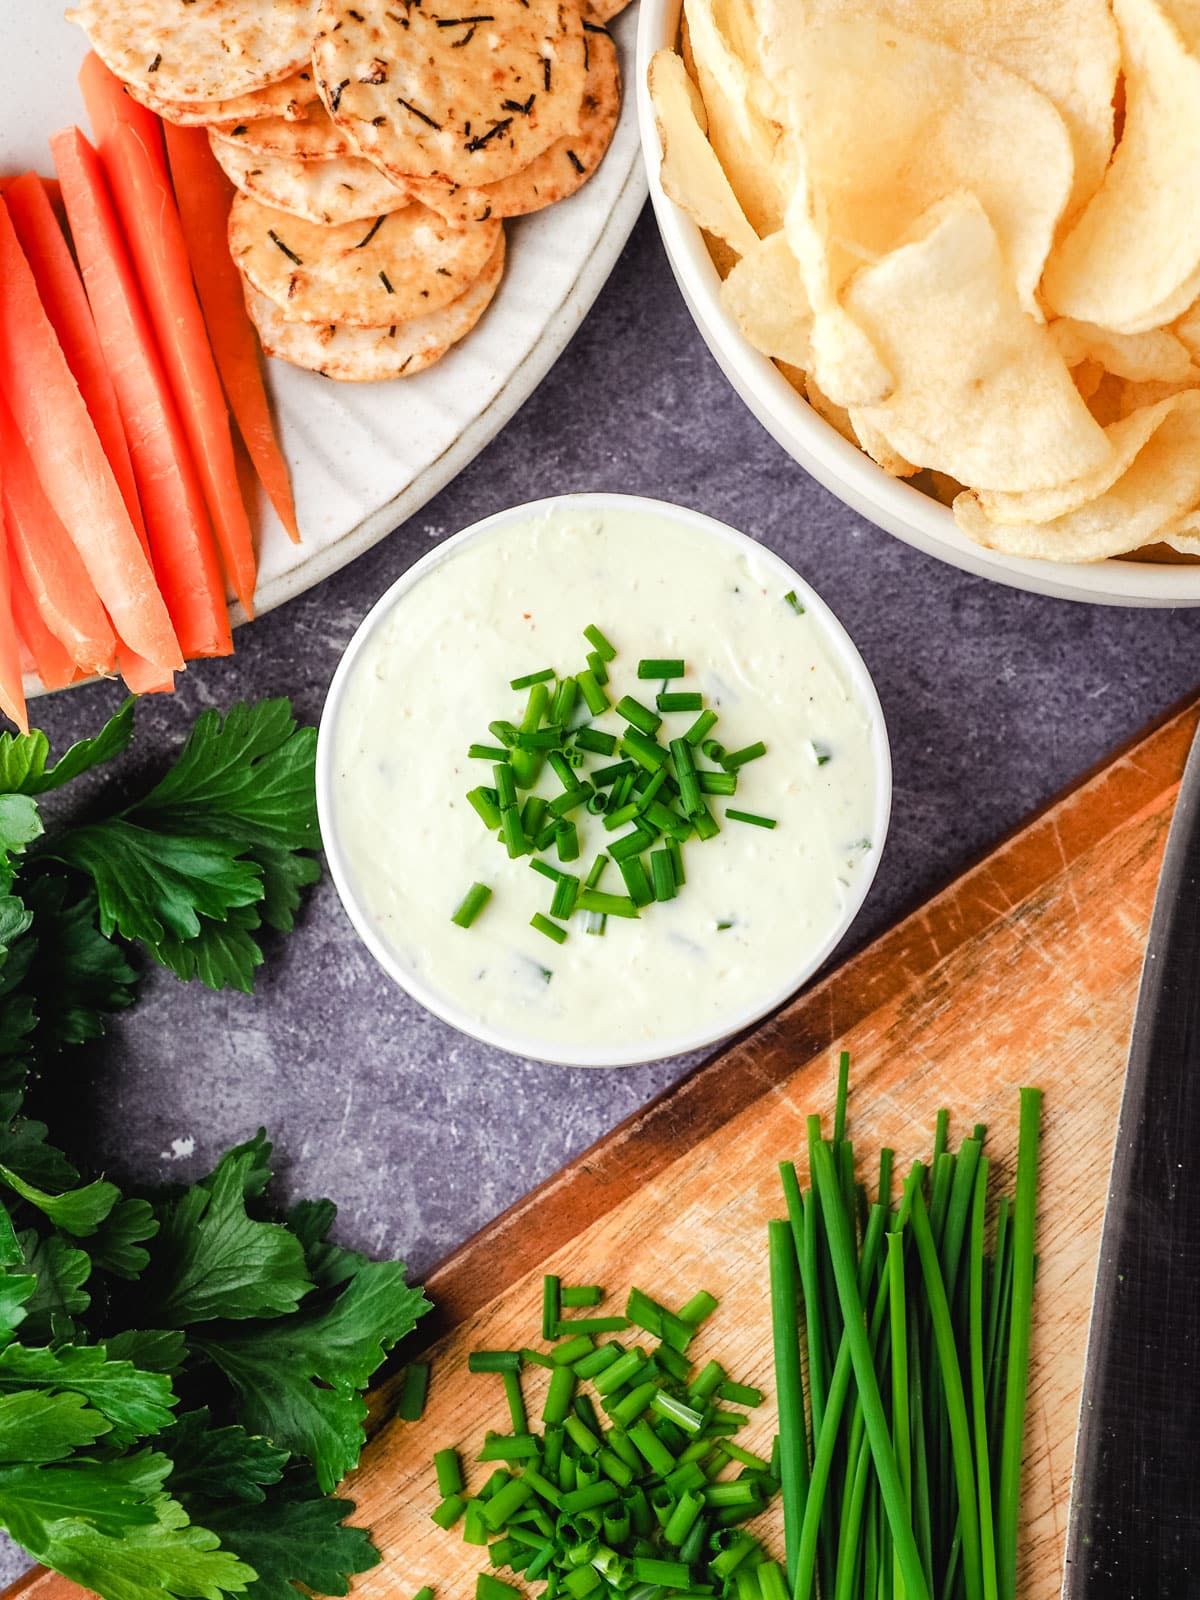 Sour cream dip garnished with fresh chives, with a bowl of chips, plate of crackers and carrot sticks, and chopping board with freshly chopped chives.